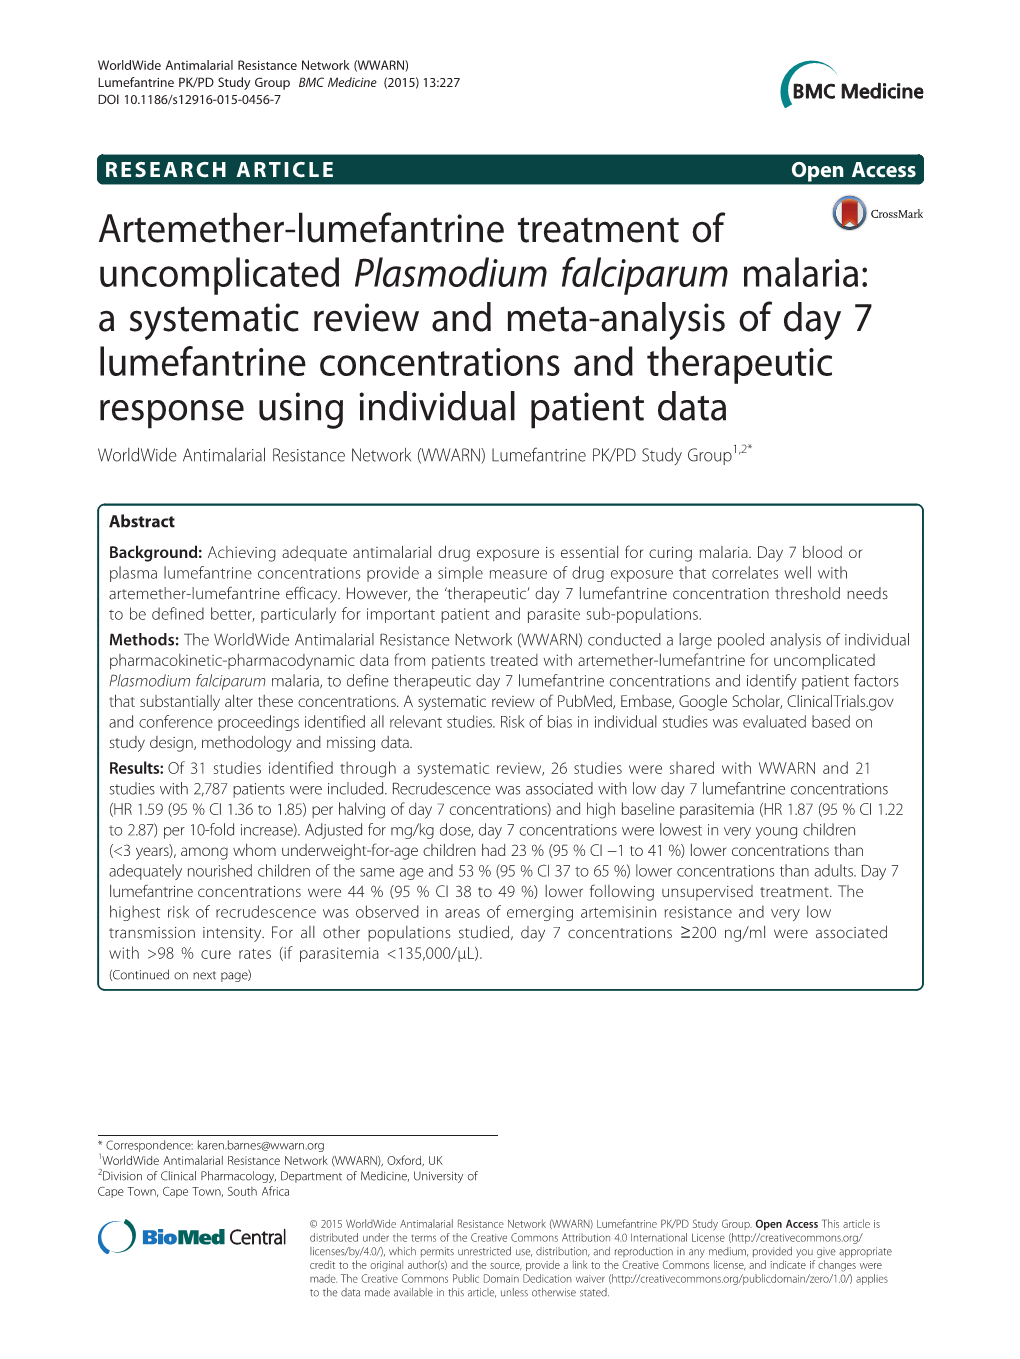 Artemether-Lumefantrine Treatment of Uncomplicated Plasmodium Falciparum Malaria: a Systematic Review and Meta-Analysis of Day 7